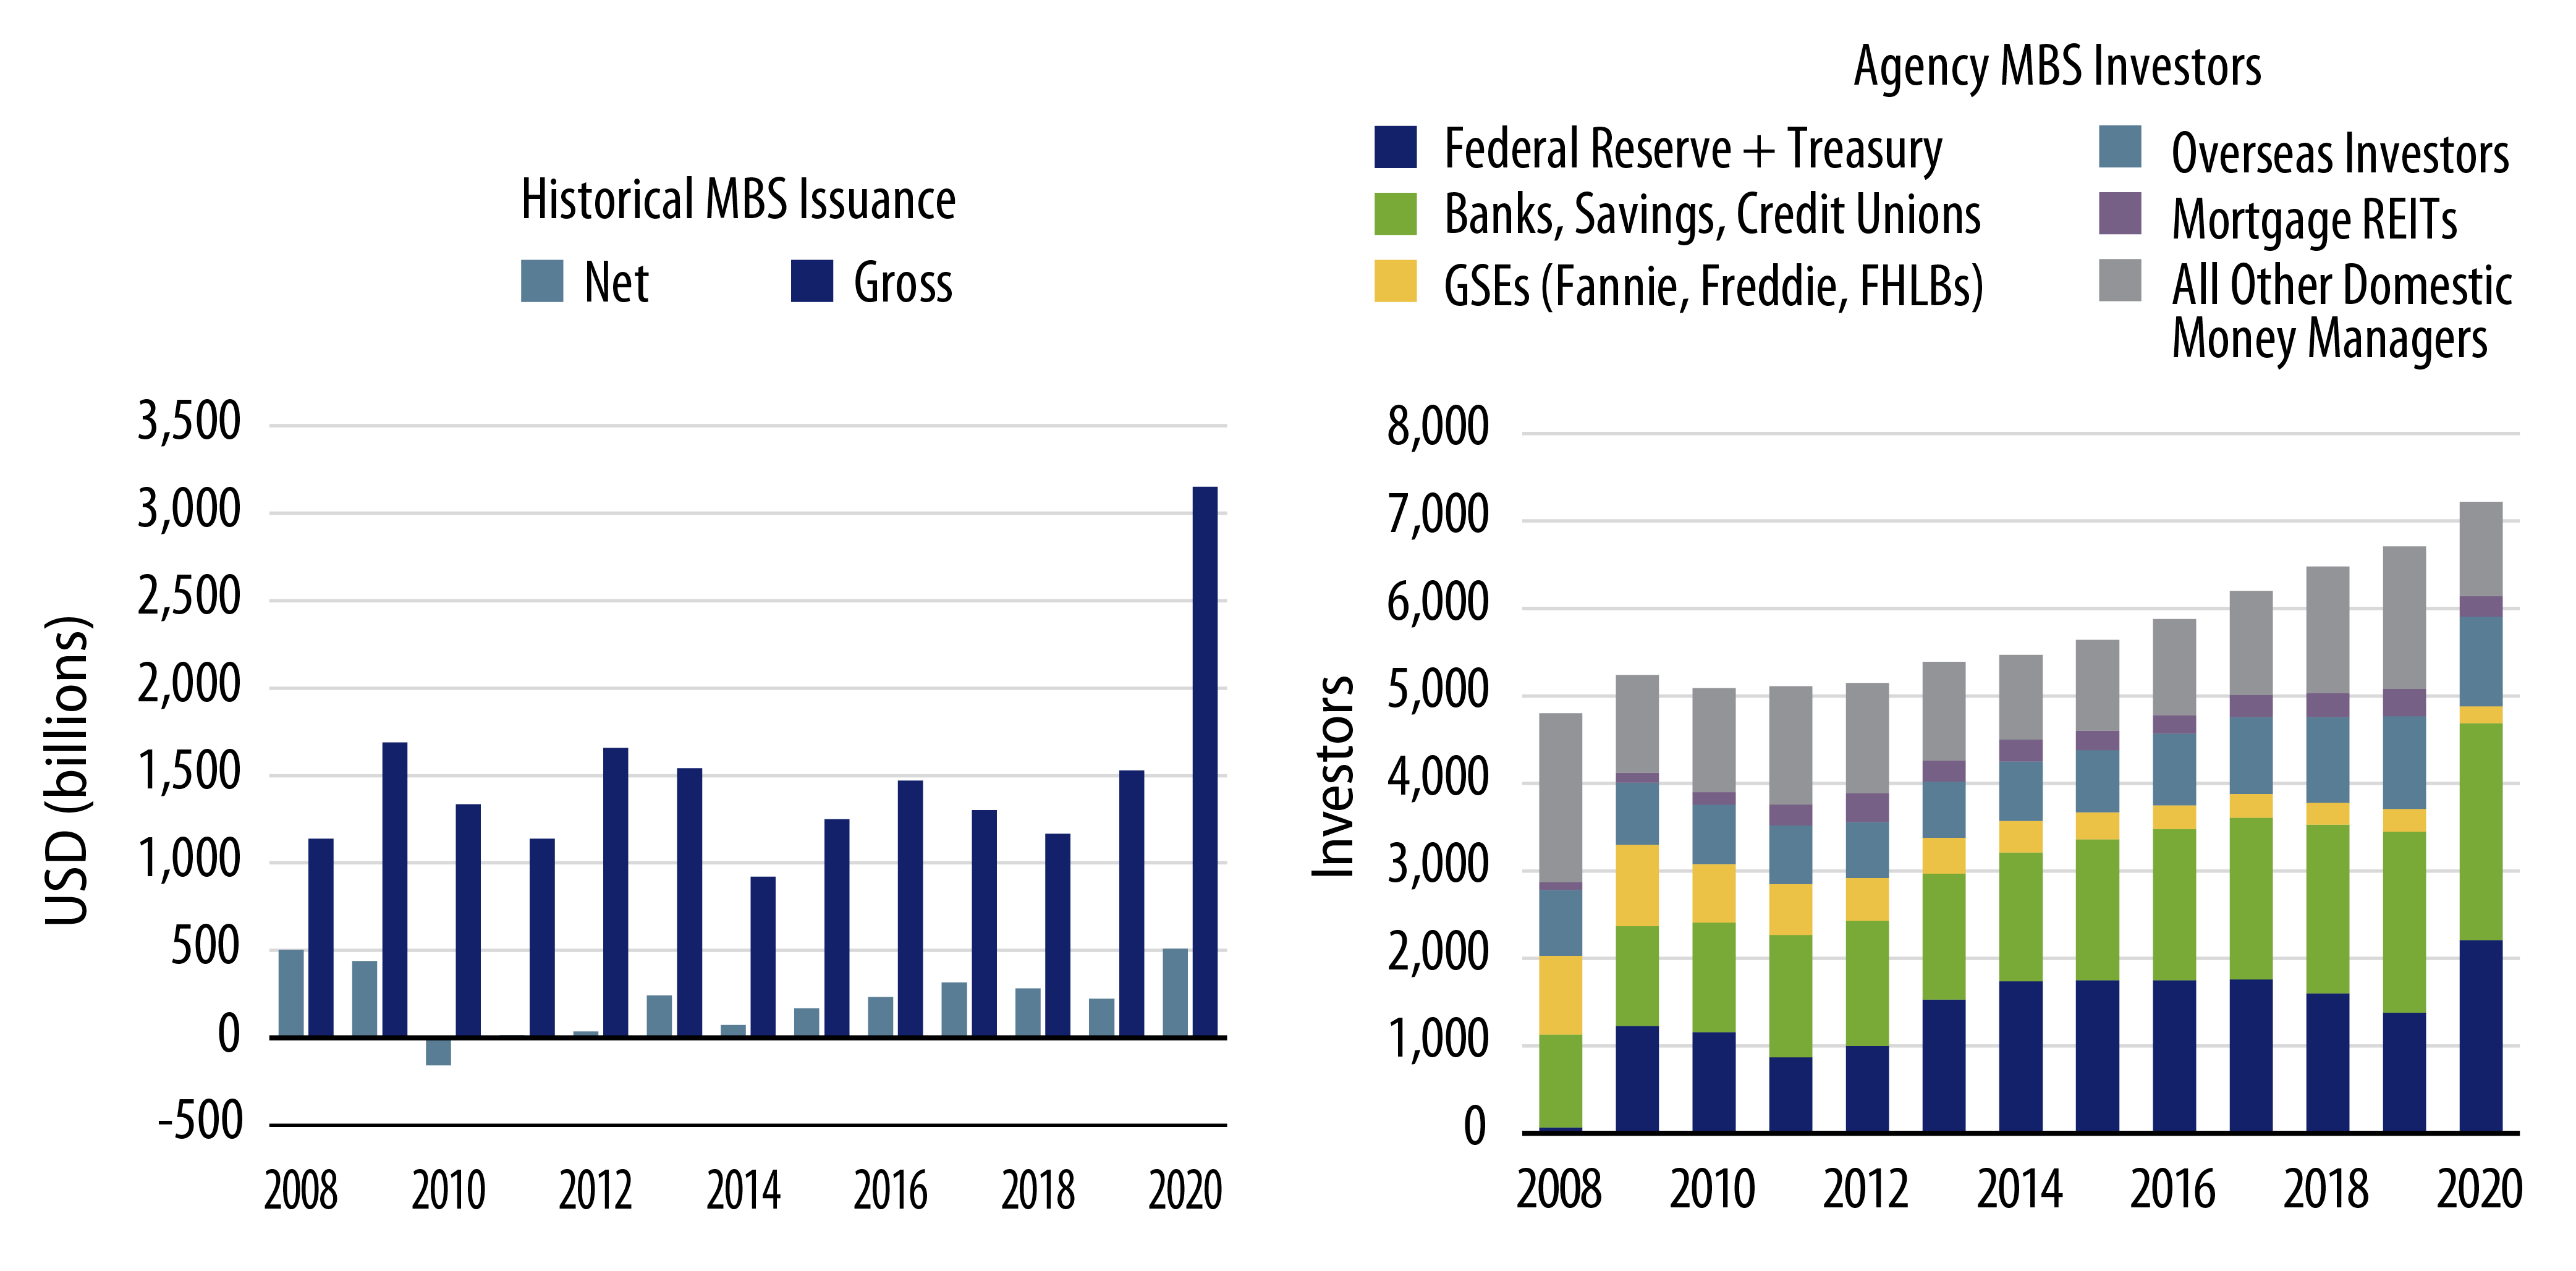 Explore Yearly Issuance and Major Agency MBS Investors (2008-2020)